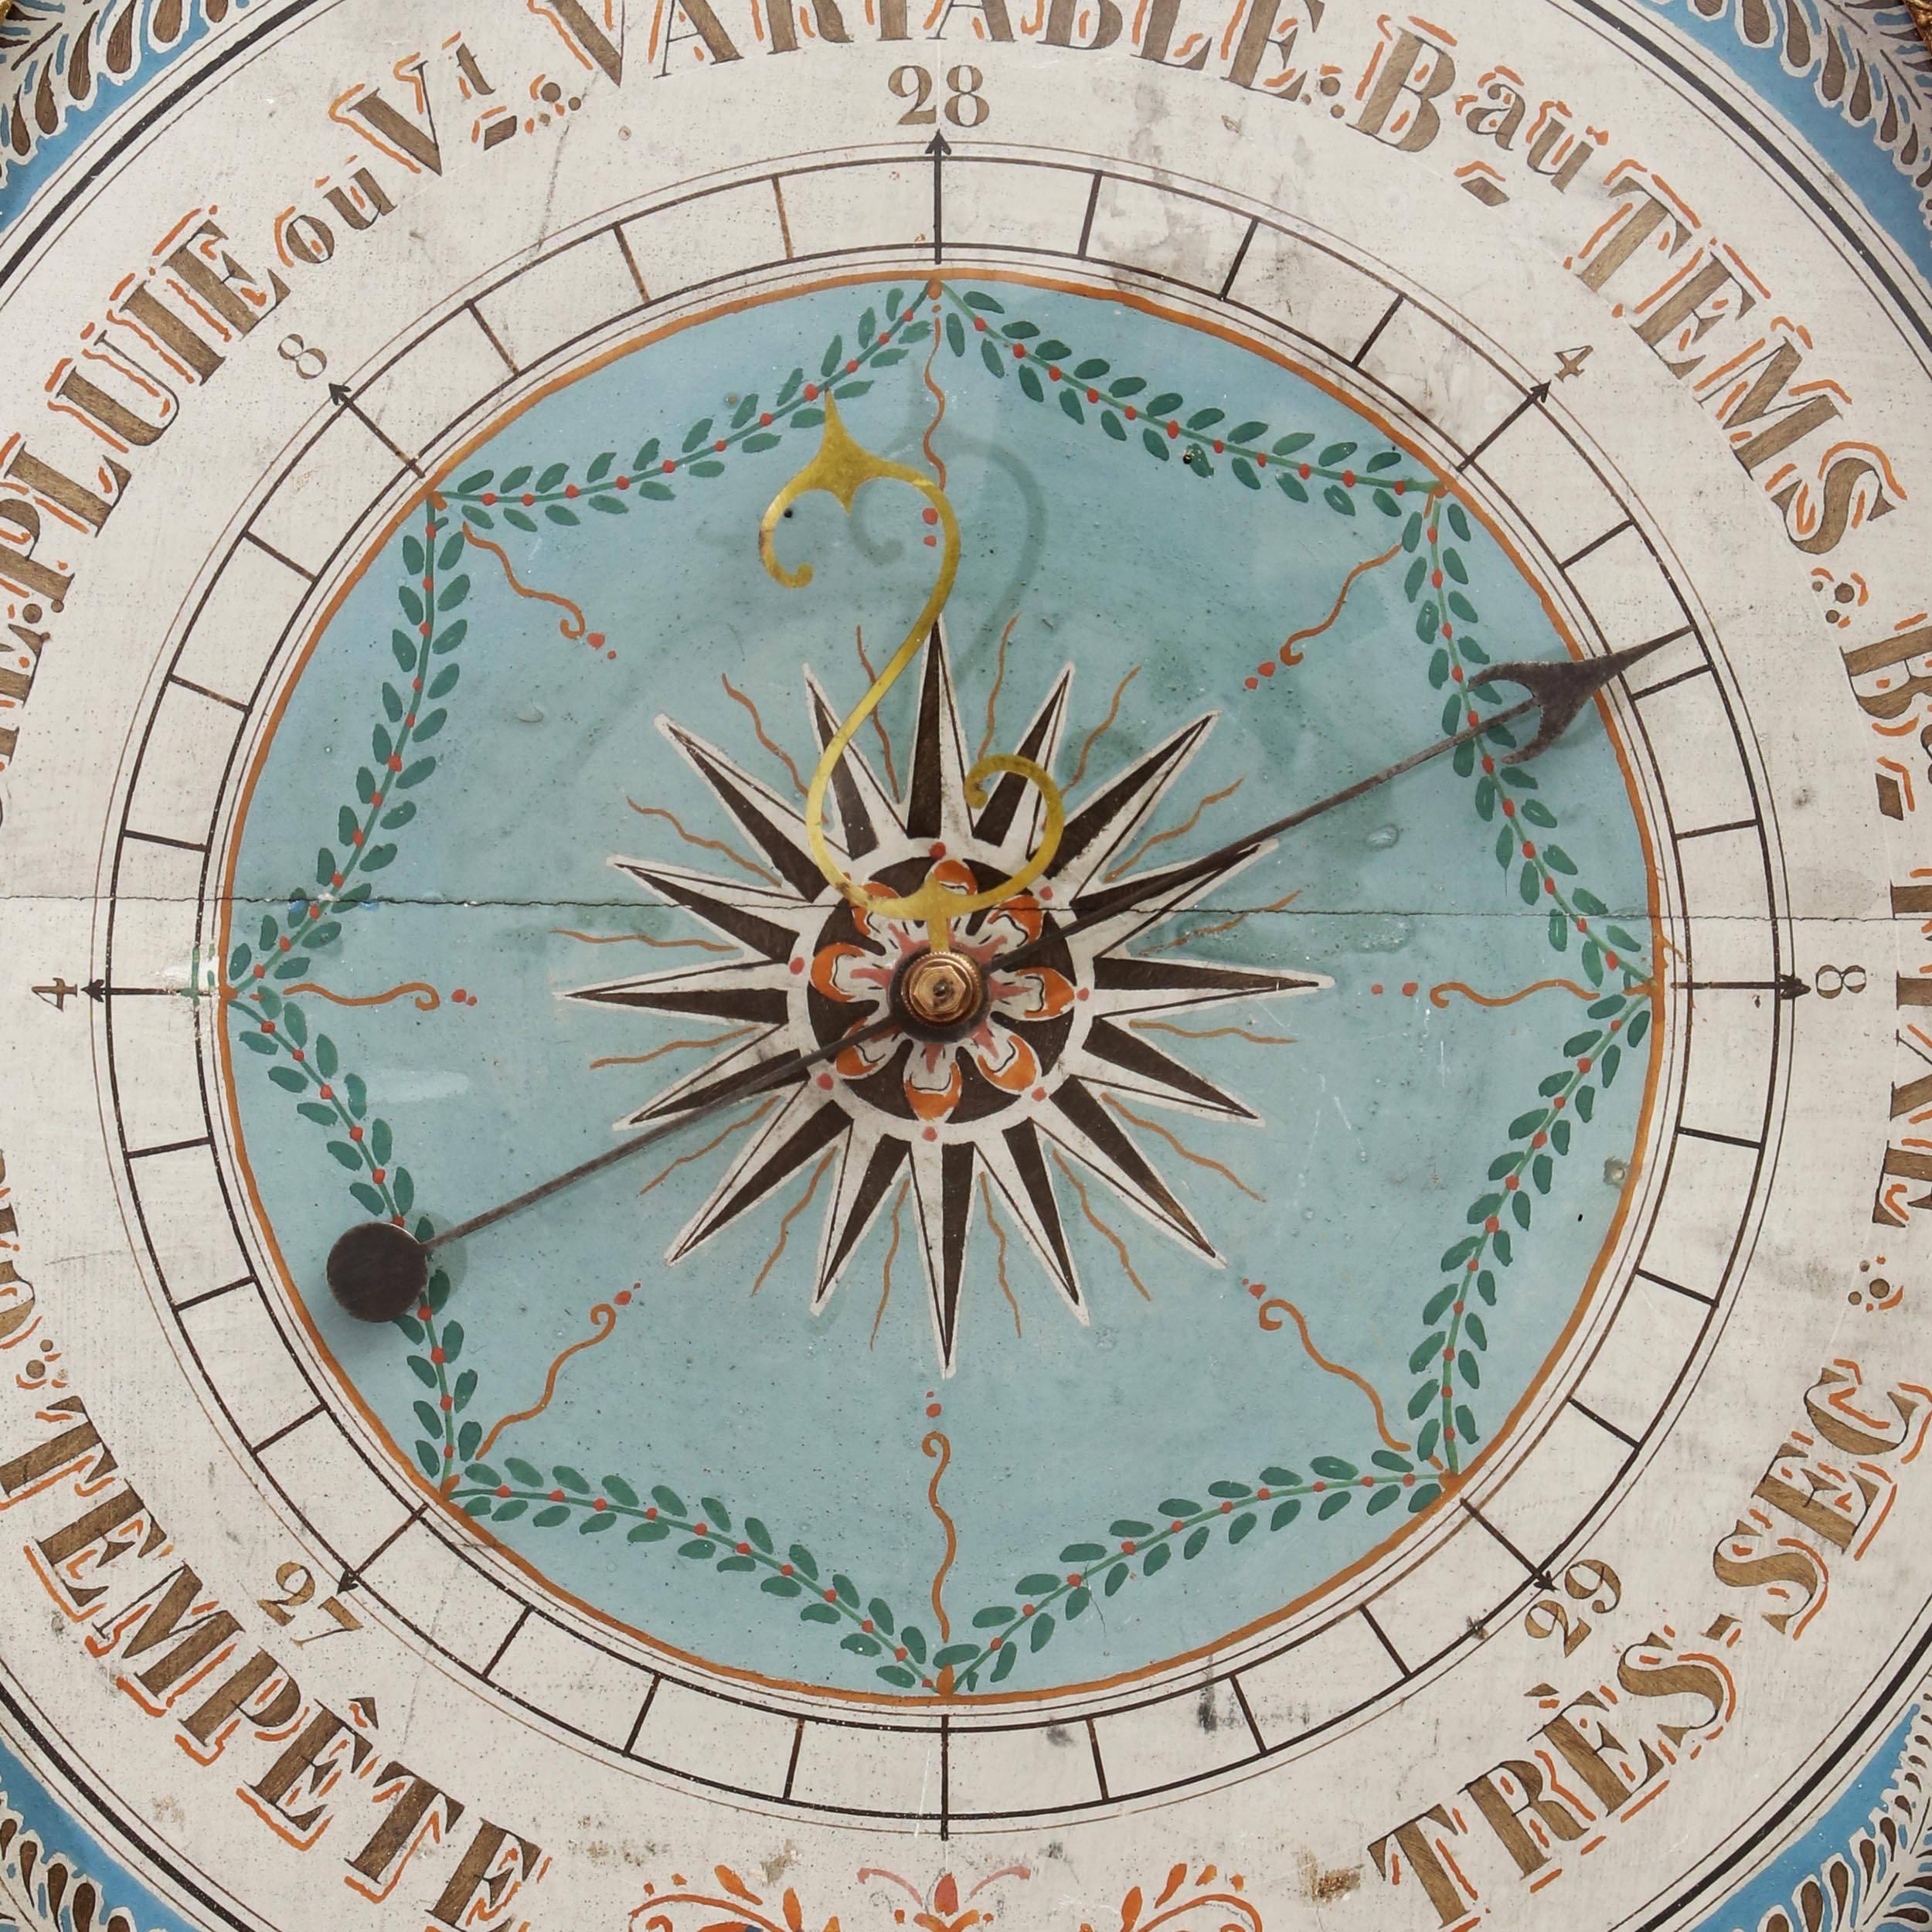 A fine early 19th century giltwood barometer with an unusual blue painted dial with central star motif. The hexagonal frame surmounted by a lyre top with a thermometer and a carved medallion.